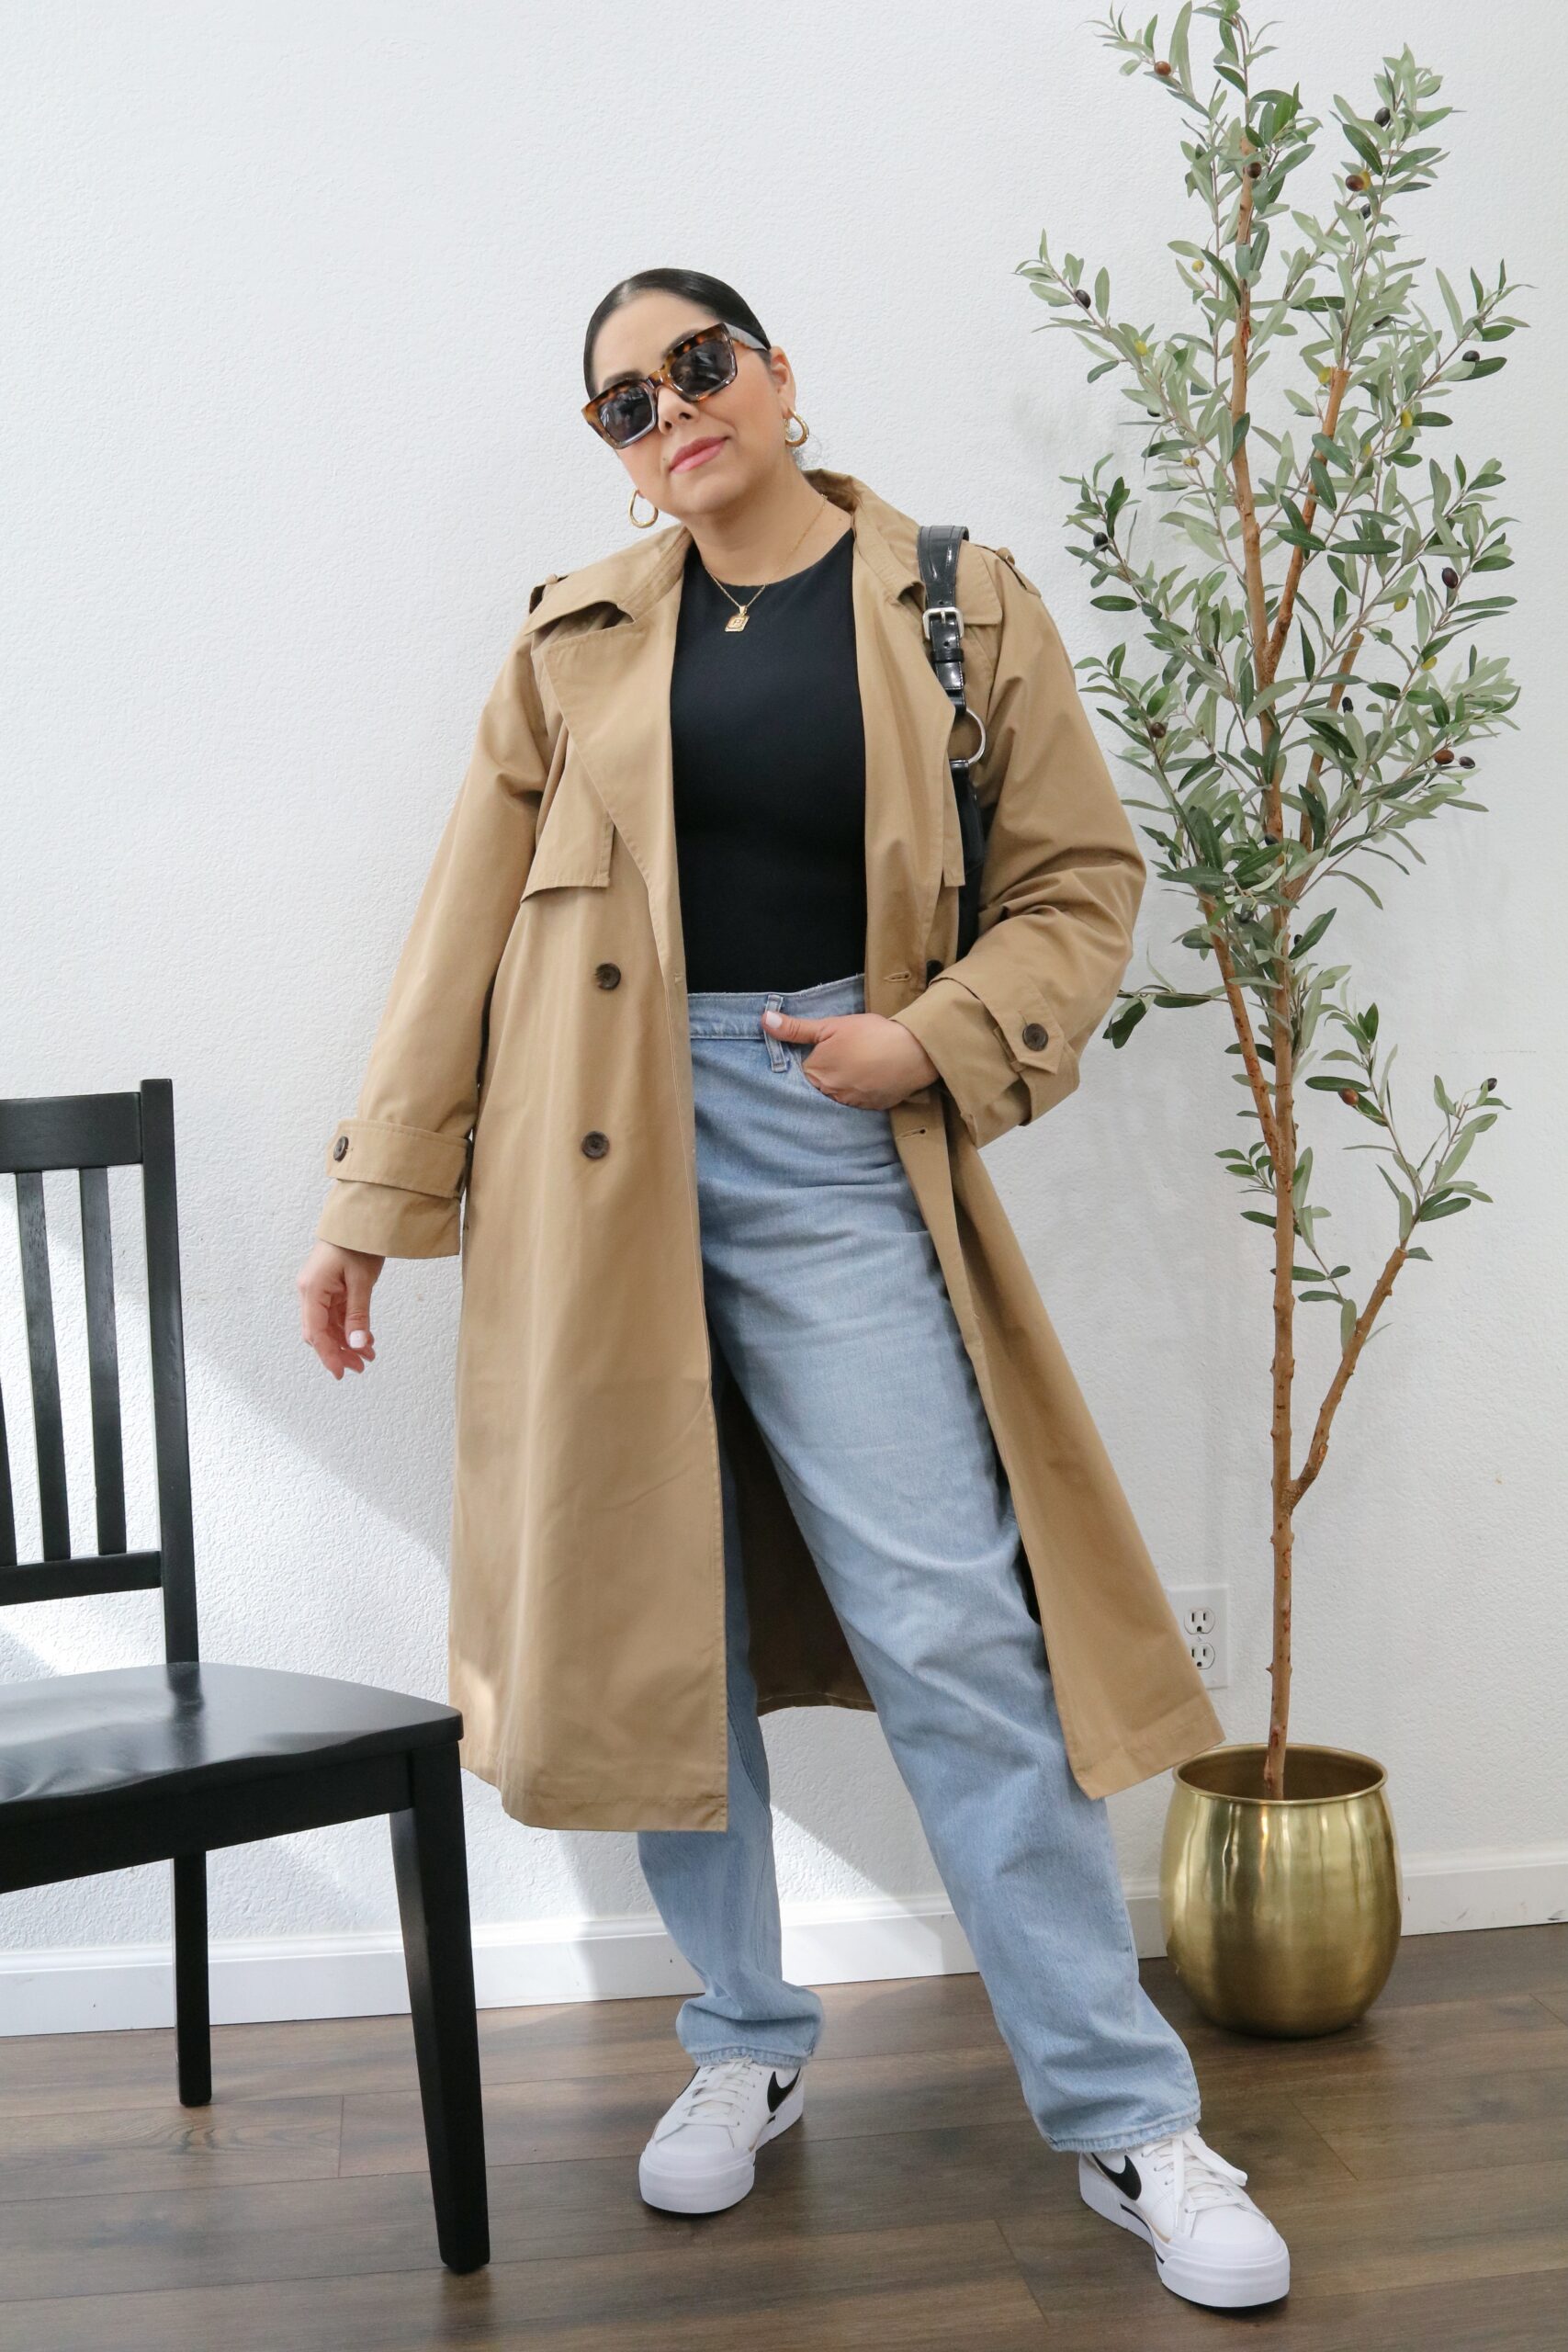 Four ways to style a trench coat - Lil bits of Chic